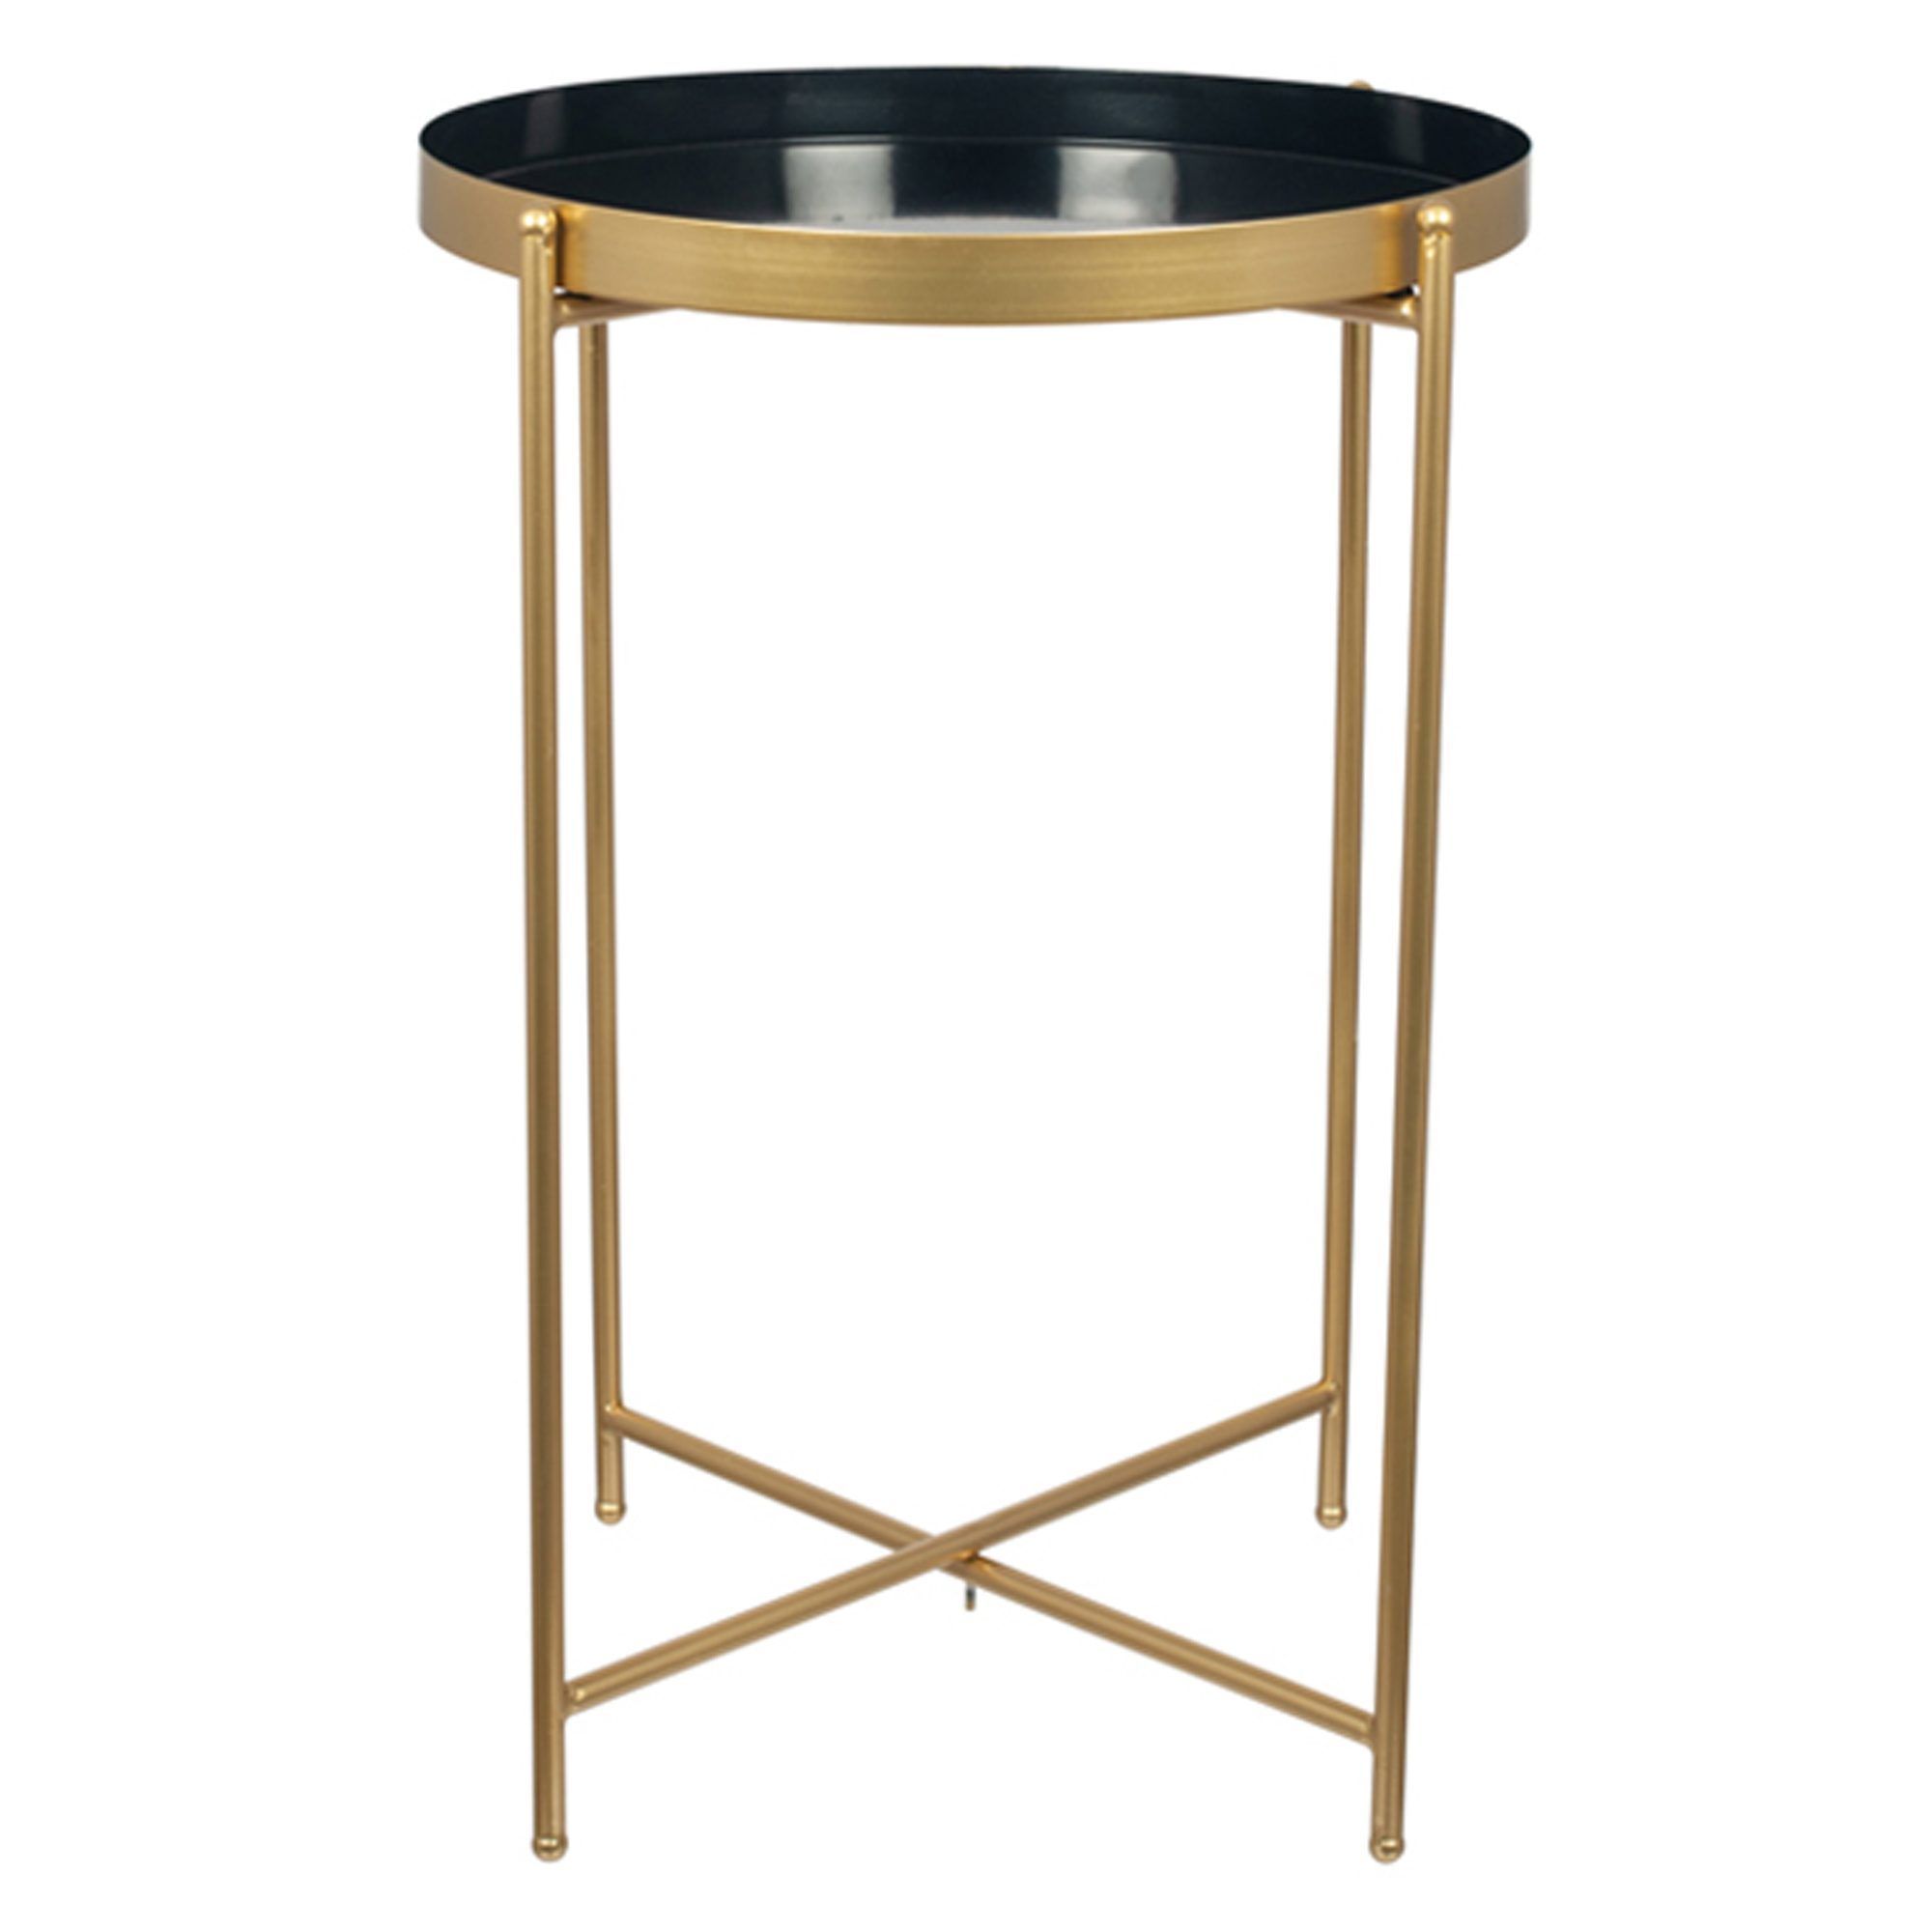 Black & Gold Metal Round Side Table | Black Side Table, Round Metal Intended For Metal Side Tables For Living Spaces (View 9 of 20)